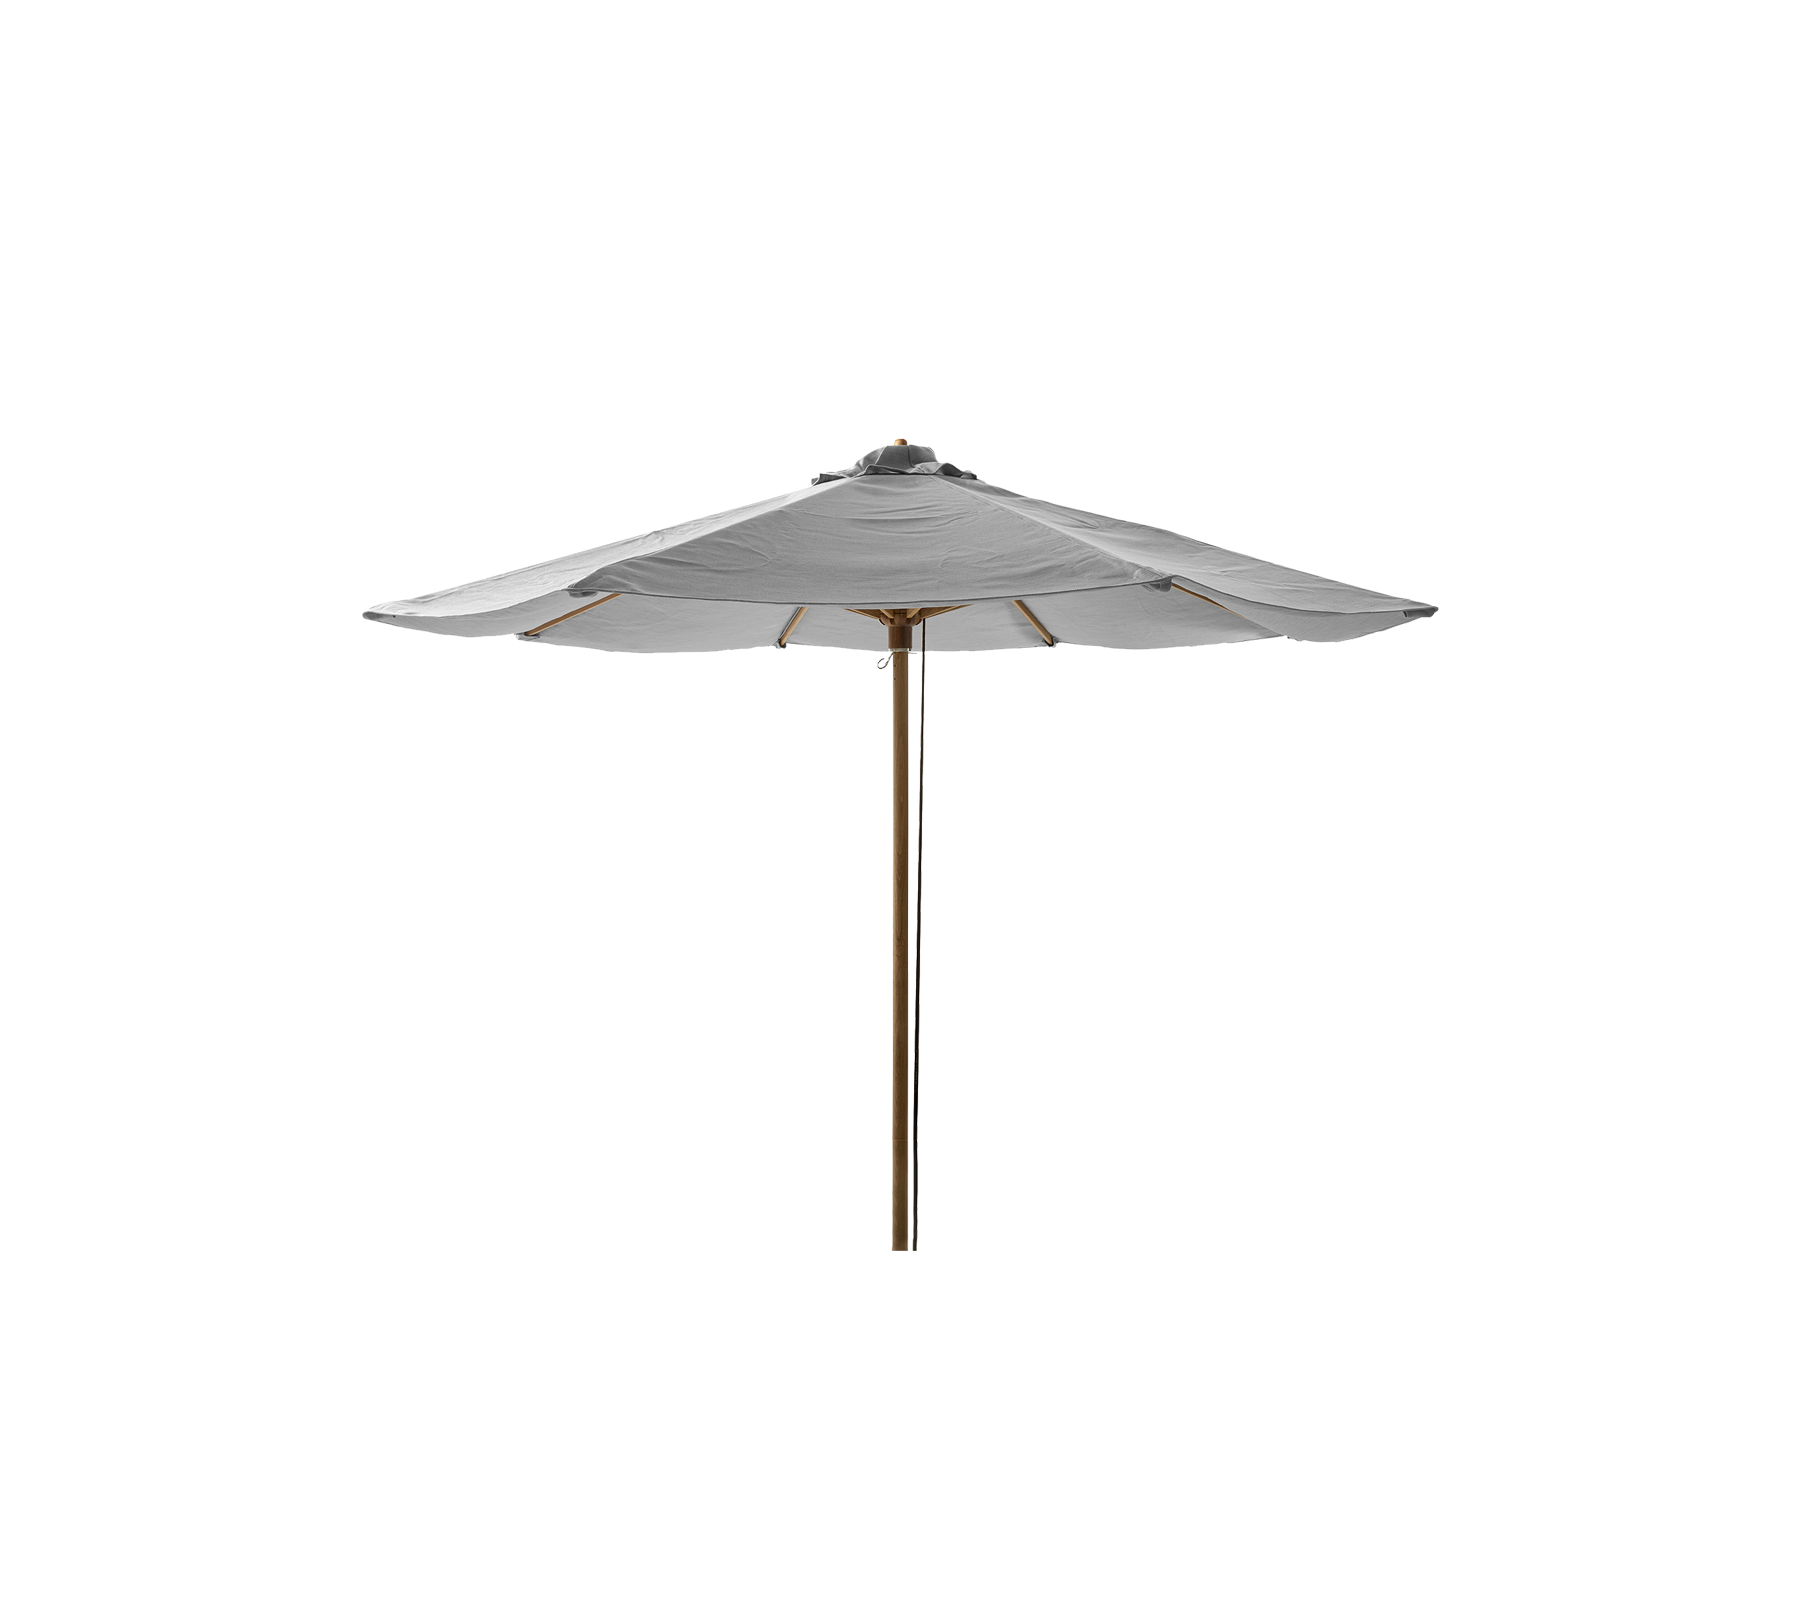 Cane-line - Classic parasol w/pulley system, dia. 3 m